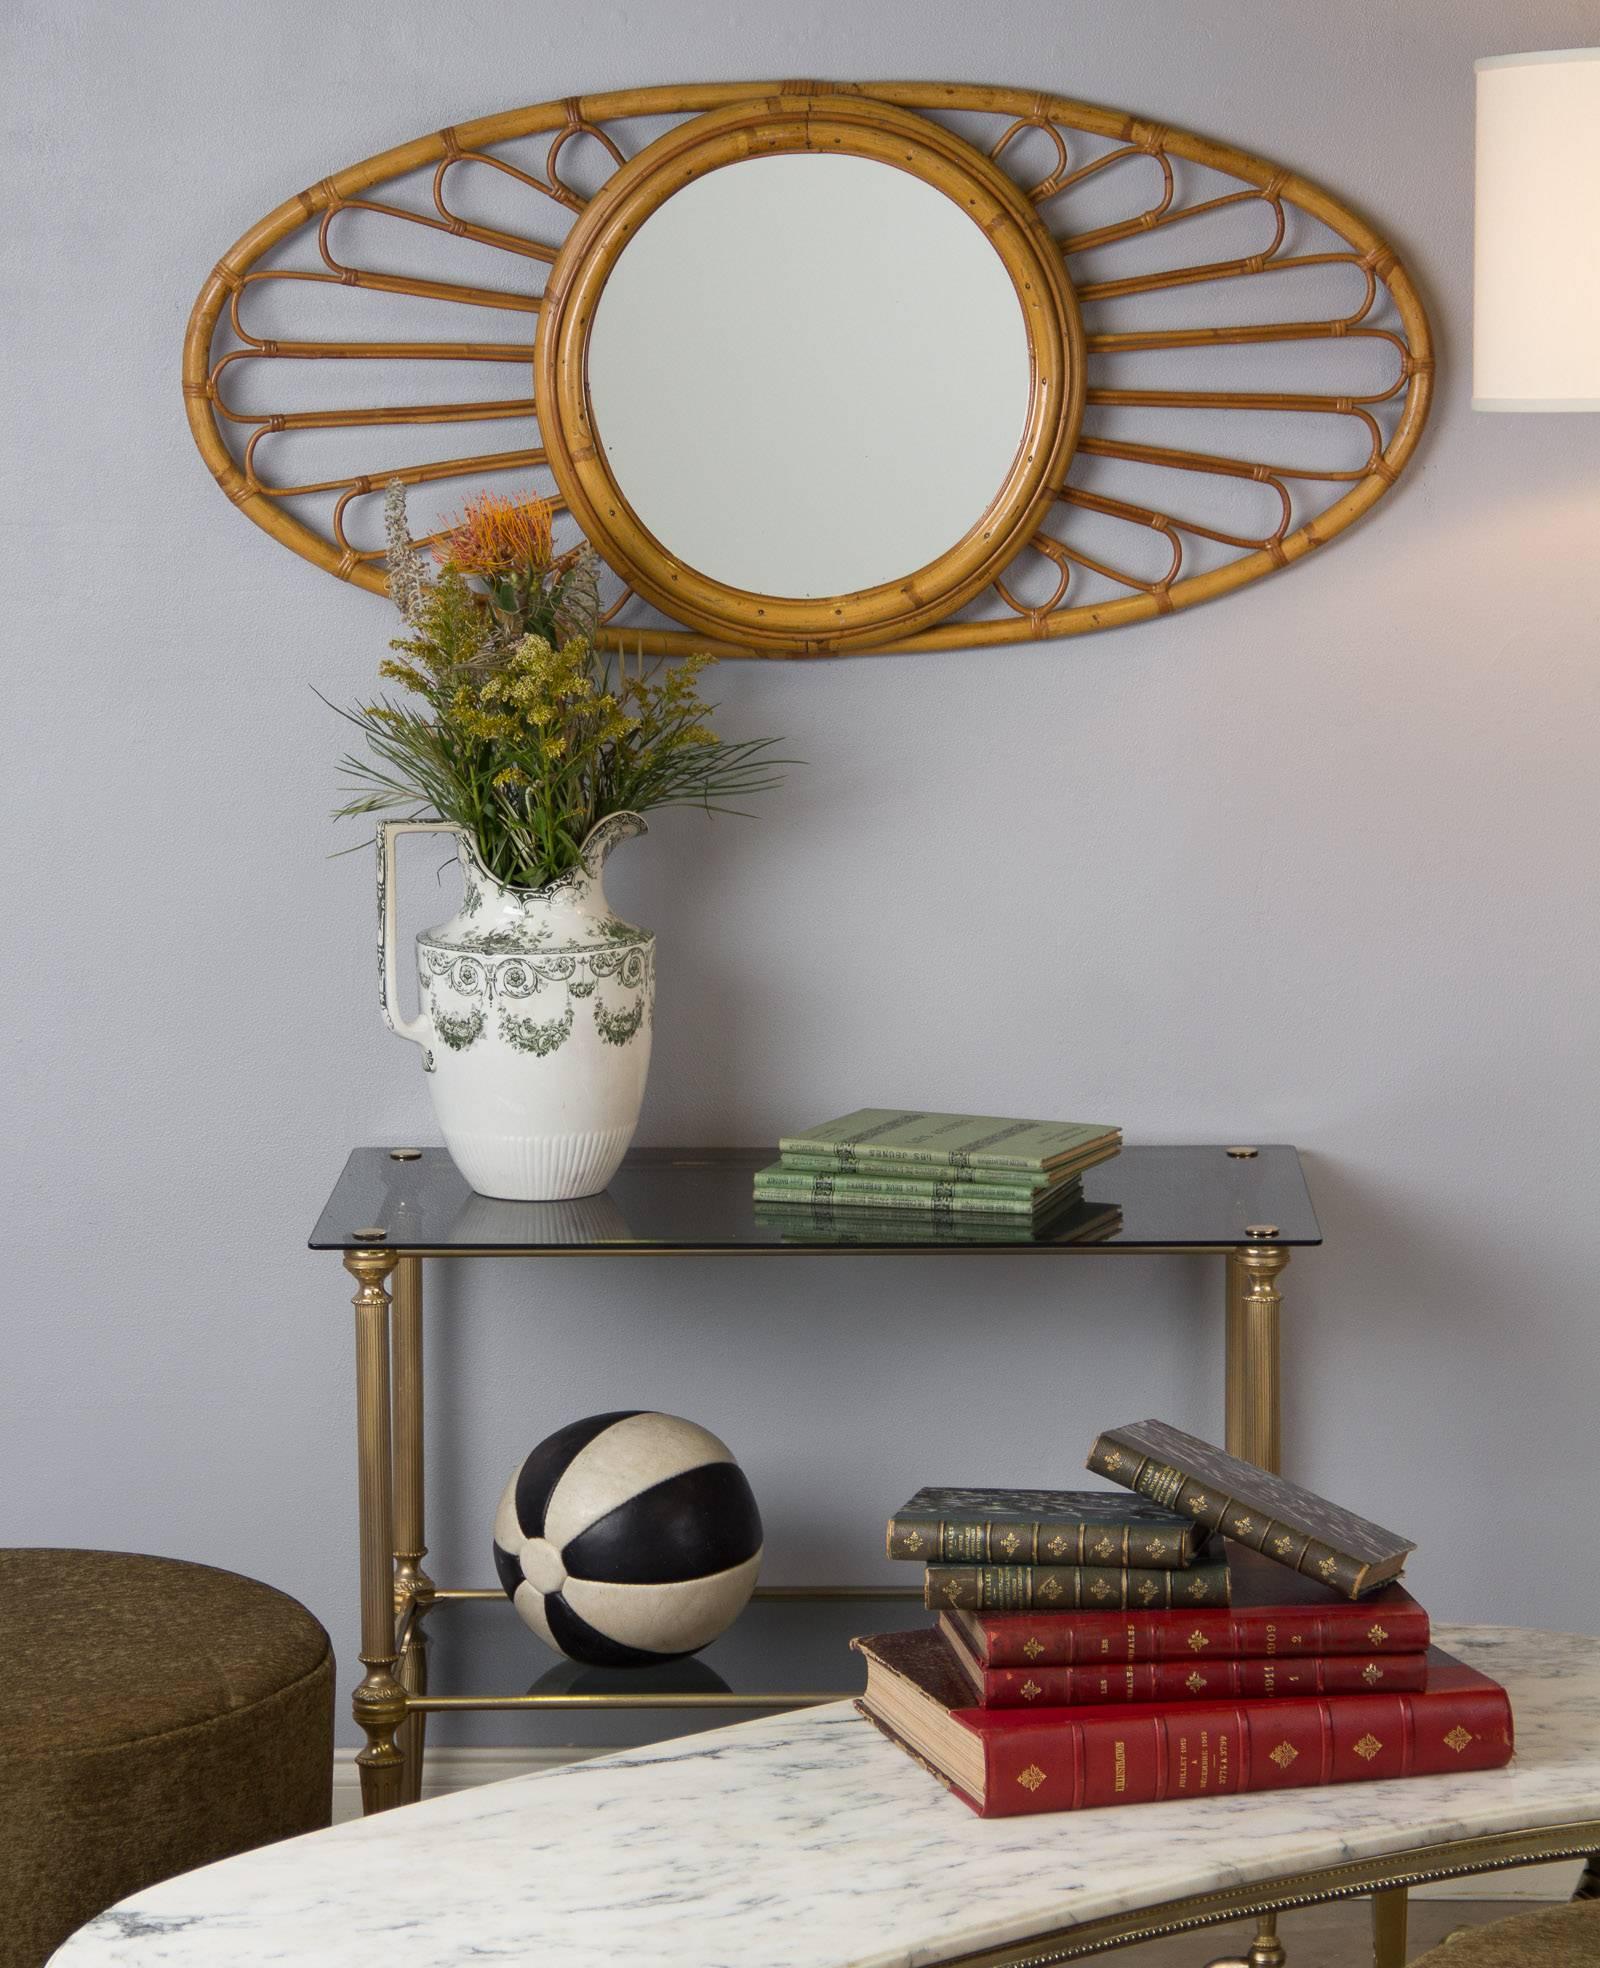 A very decorative round vintage mirror, circa 1960s, with an oval bamboo and rattan frame that can be hung either horizontally or vertically. The glass itself measures 15" in diameter.